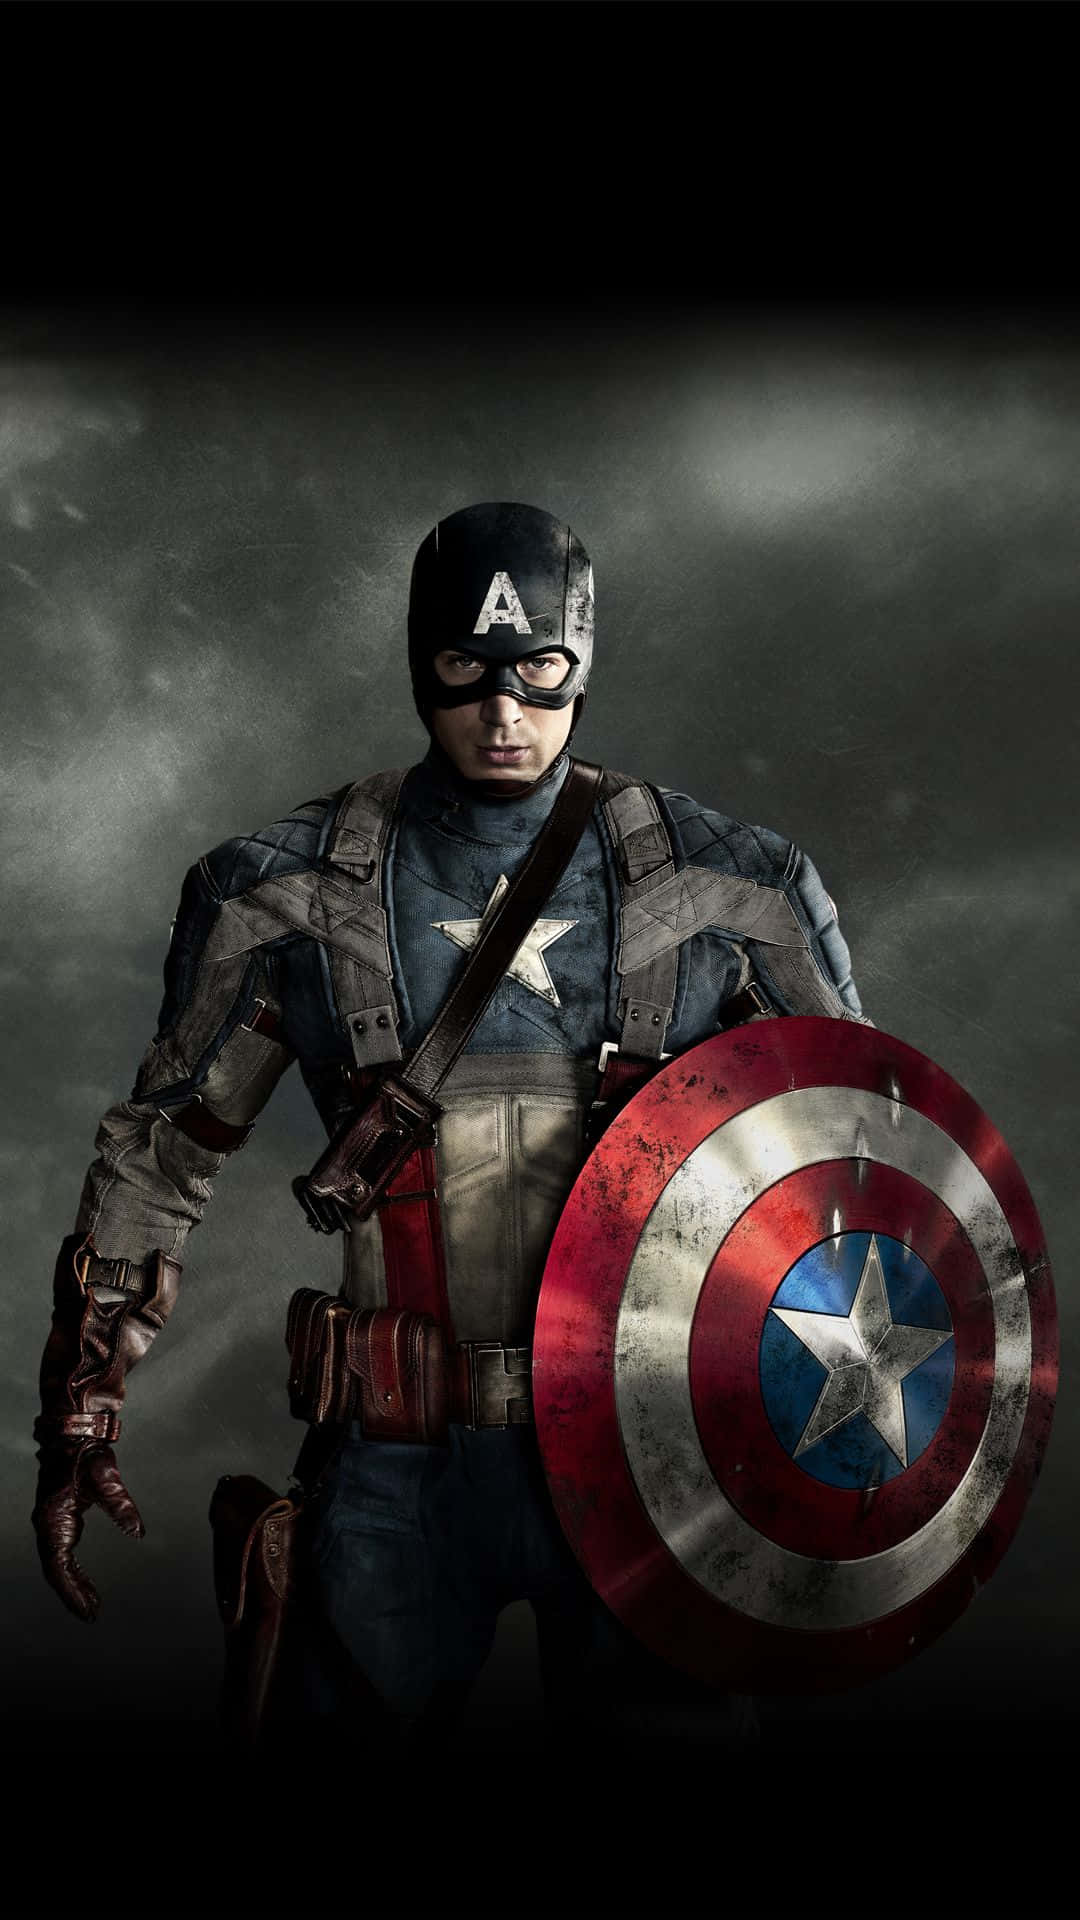 “Ahead of the Game: Captain America”